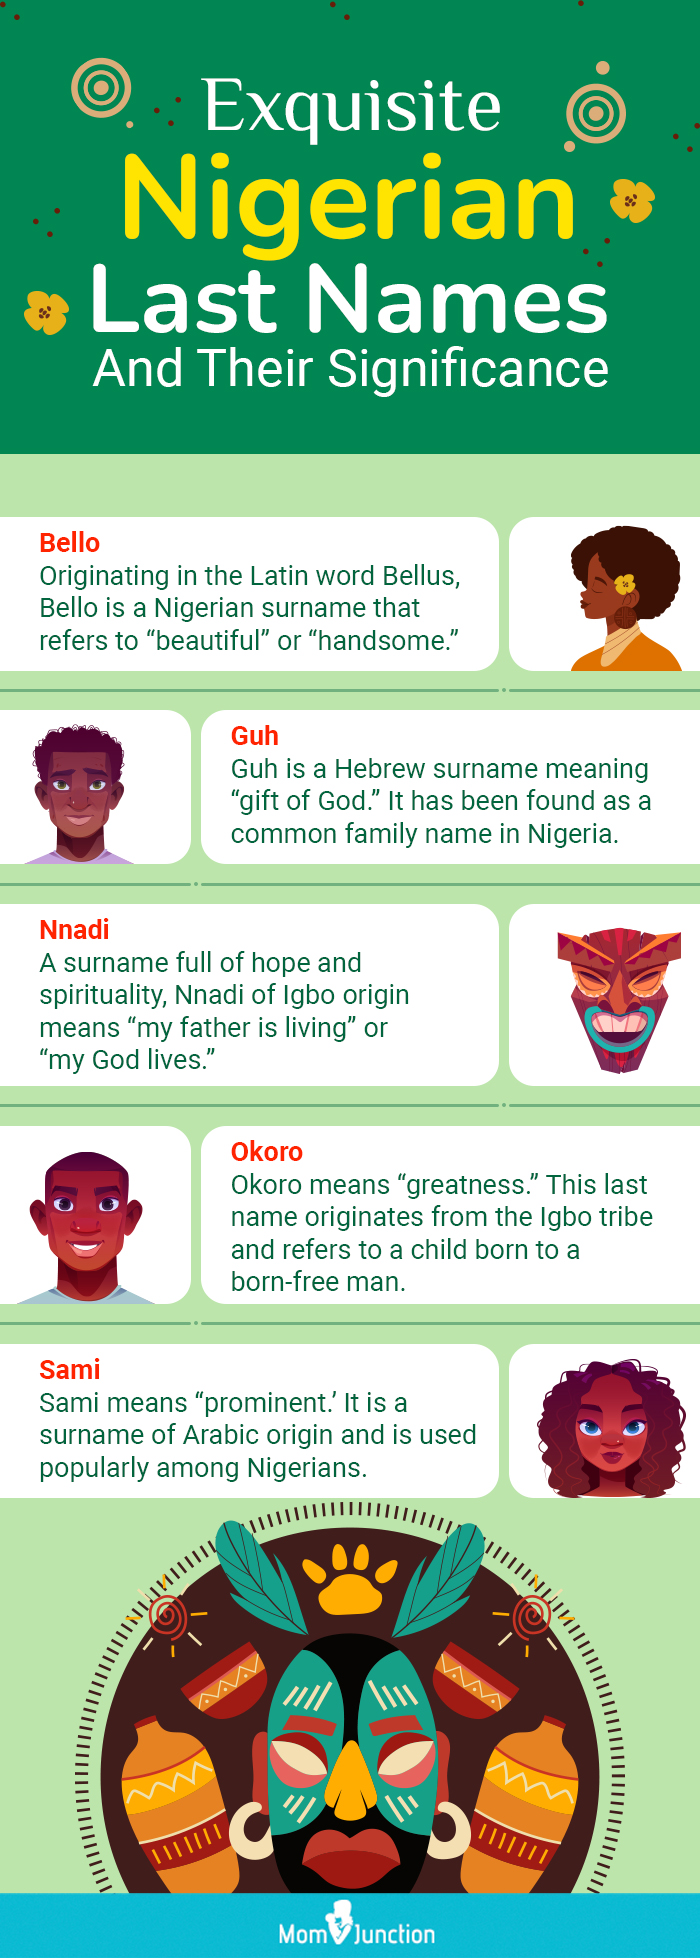 exquisite nigerian last names and their significance (infographic)